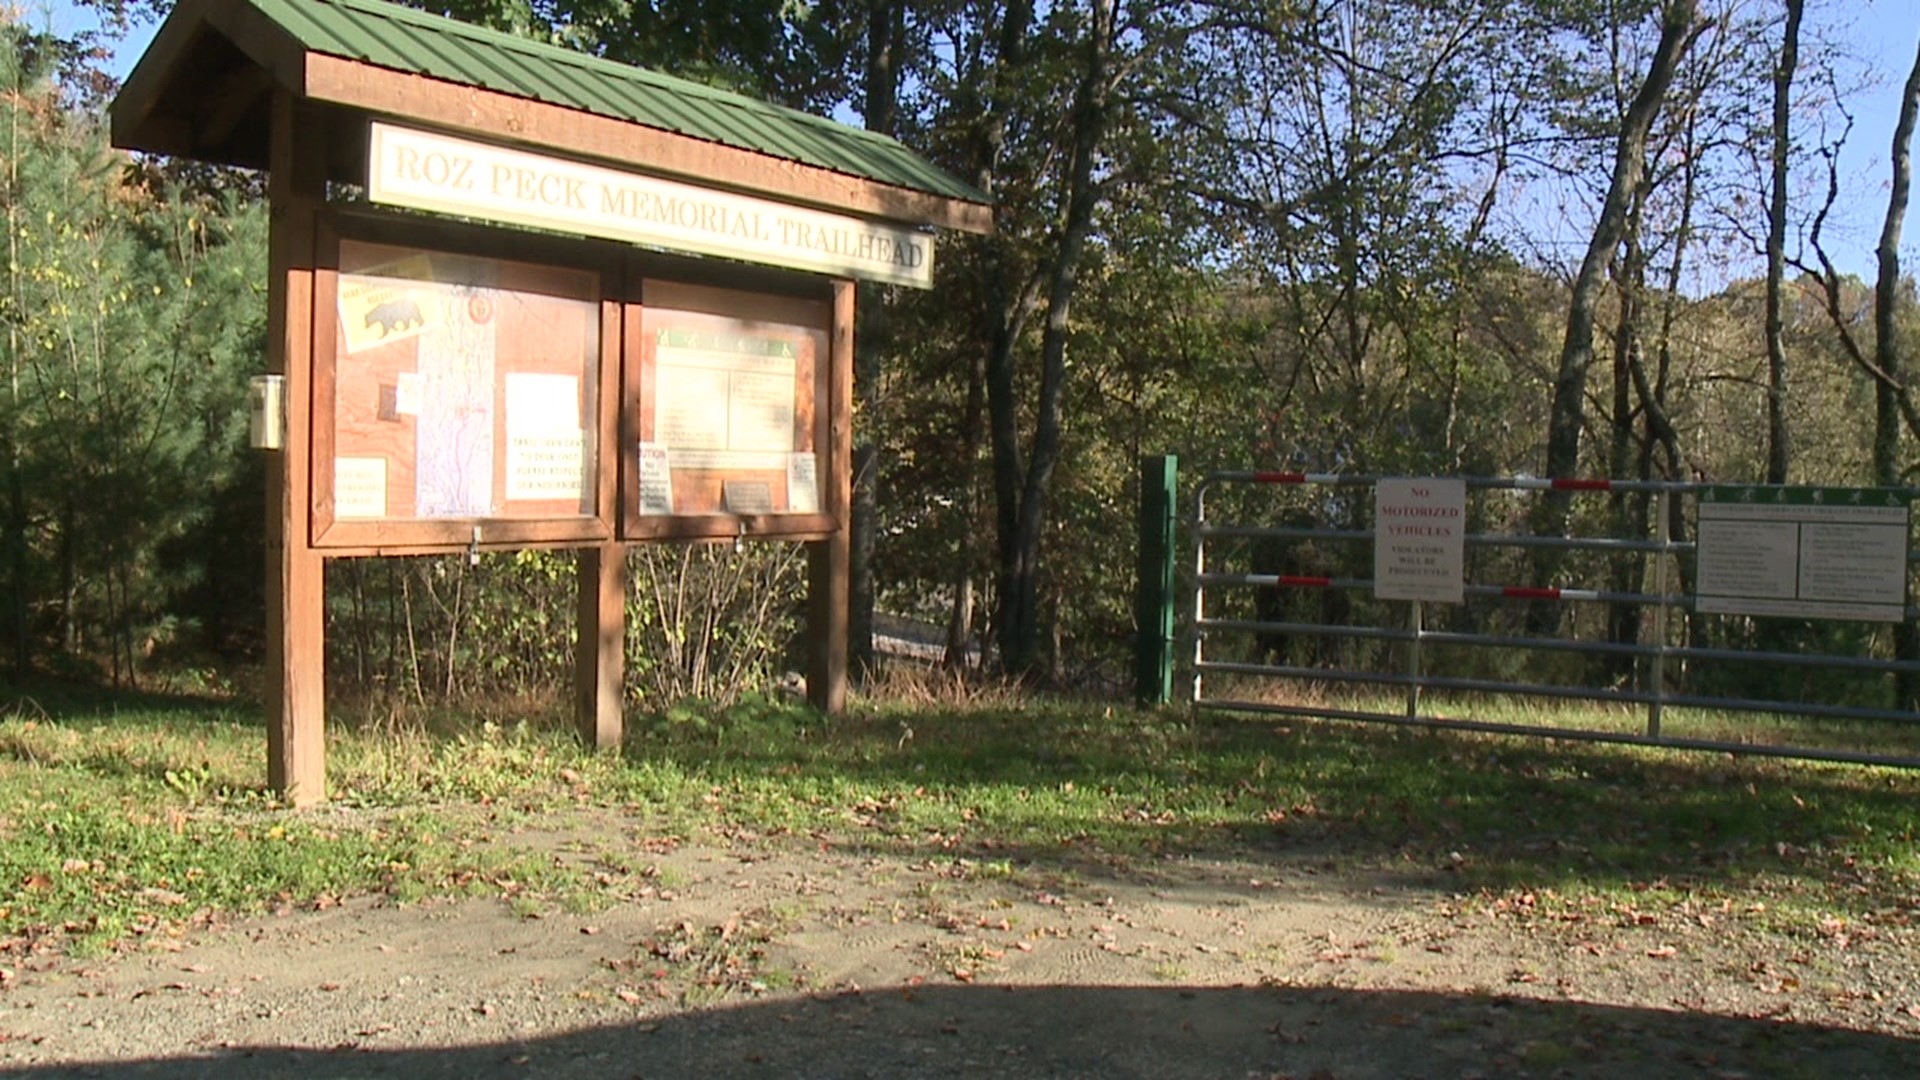 Hikers are asked to lock up their cars after a series of break-ins at trailheads in Lackawanna County; police say the thieves stole the victims' identities.